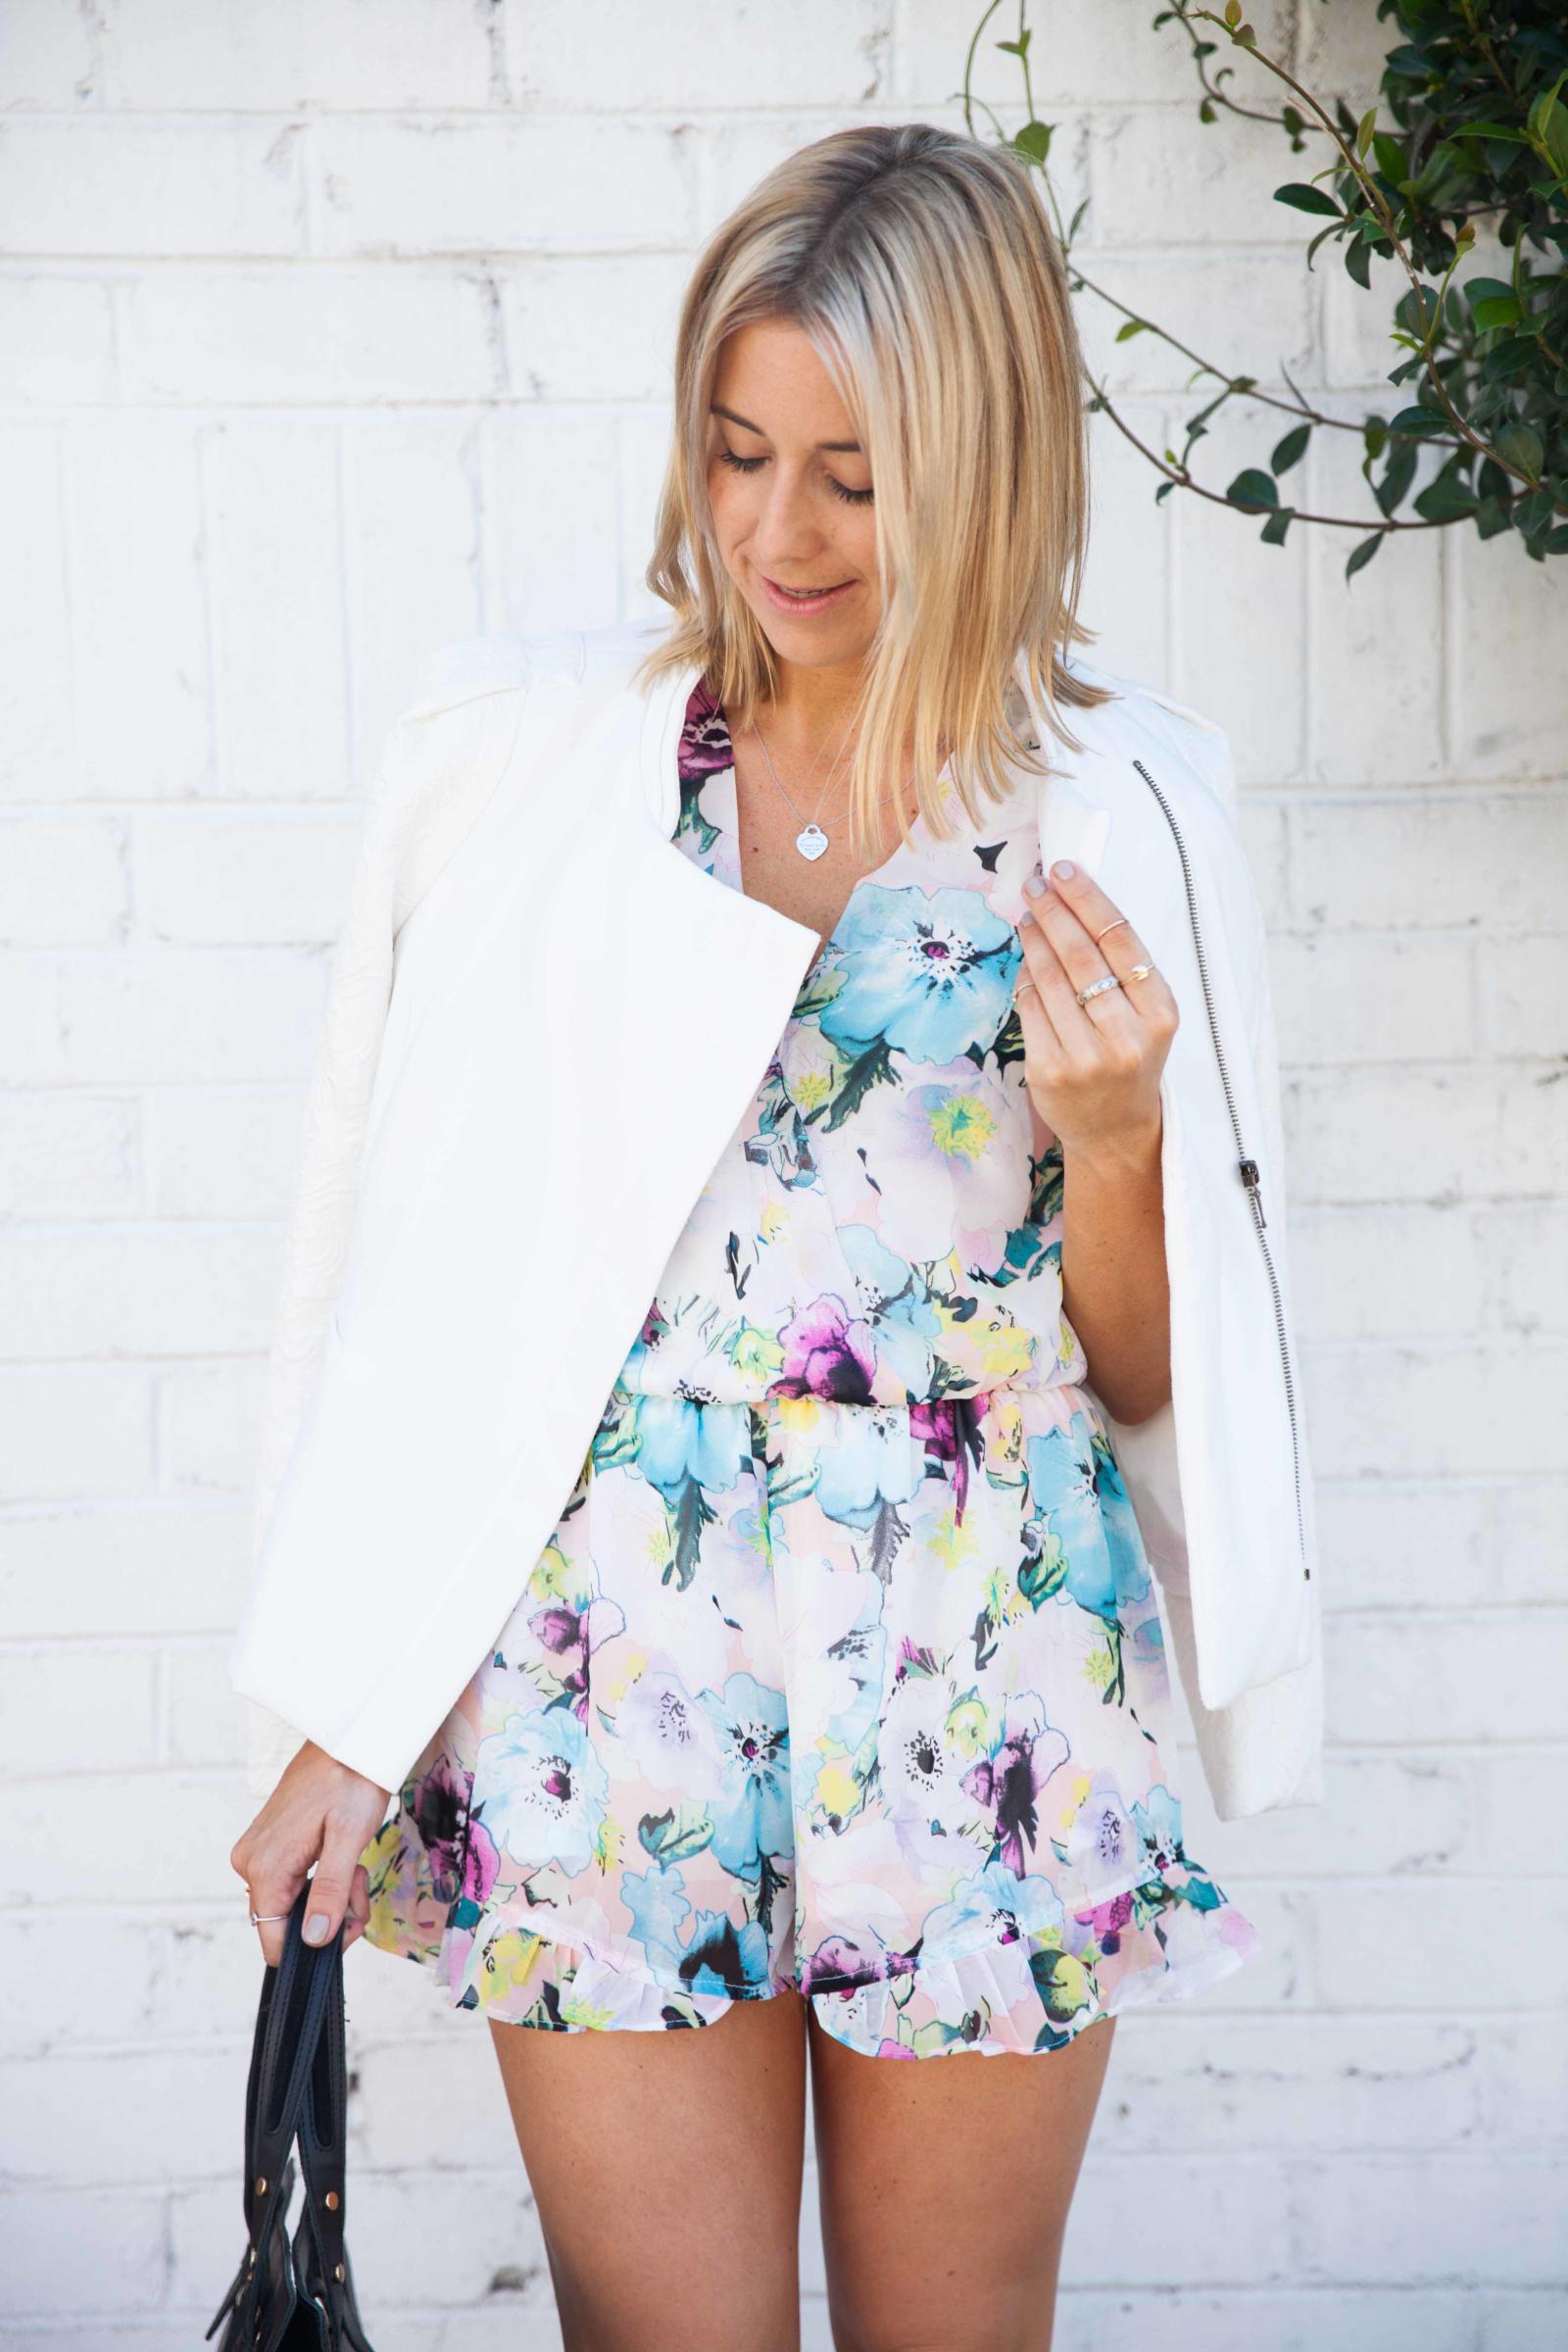 The Floral Playsuit